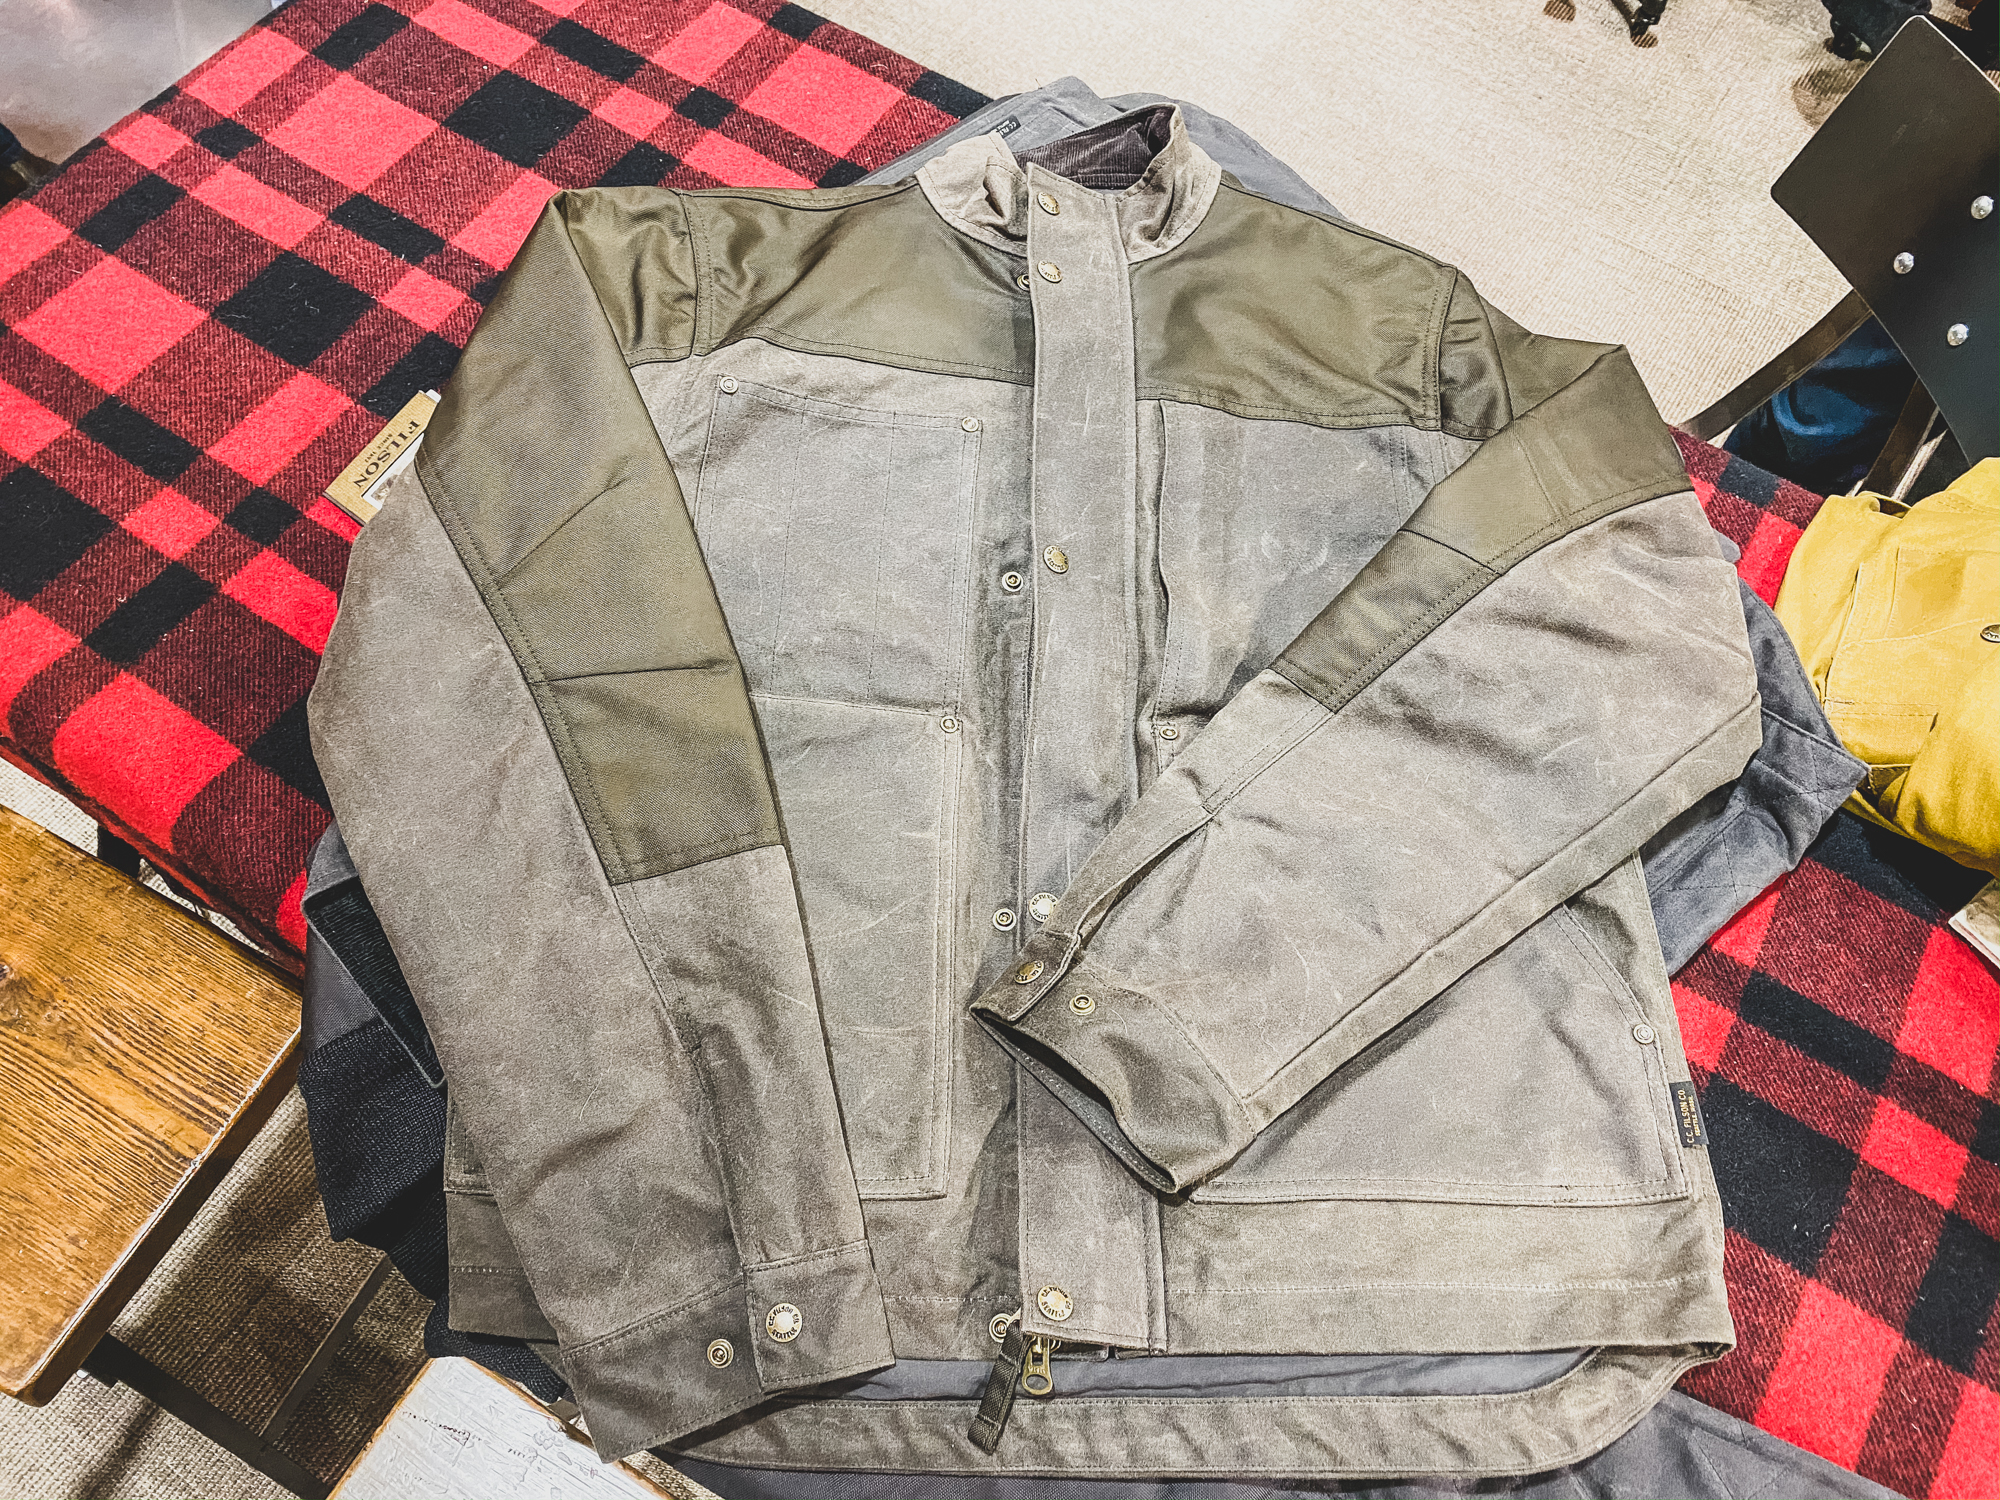 Filson Launches their New Motorcycle Line - Expedition Portal